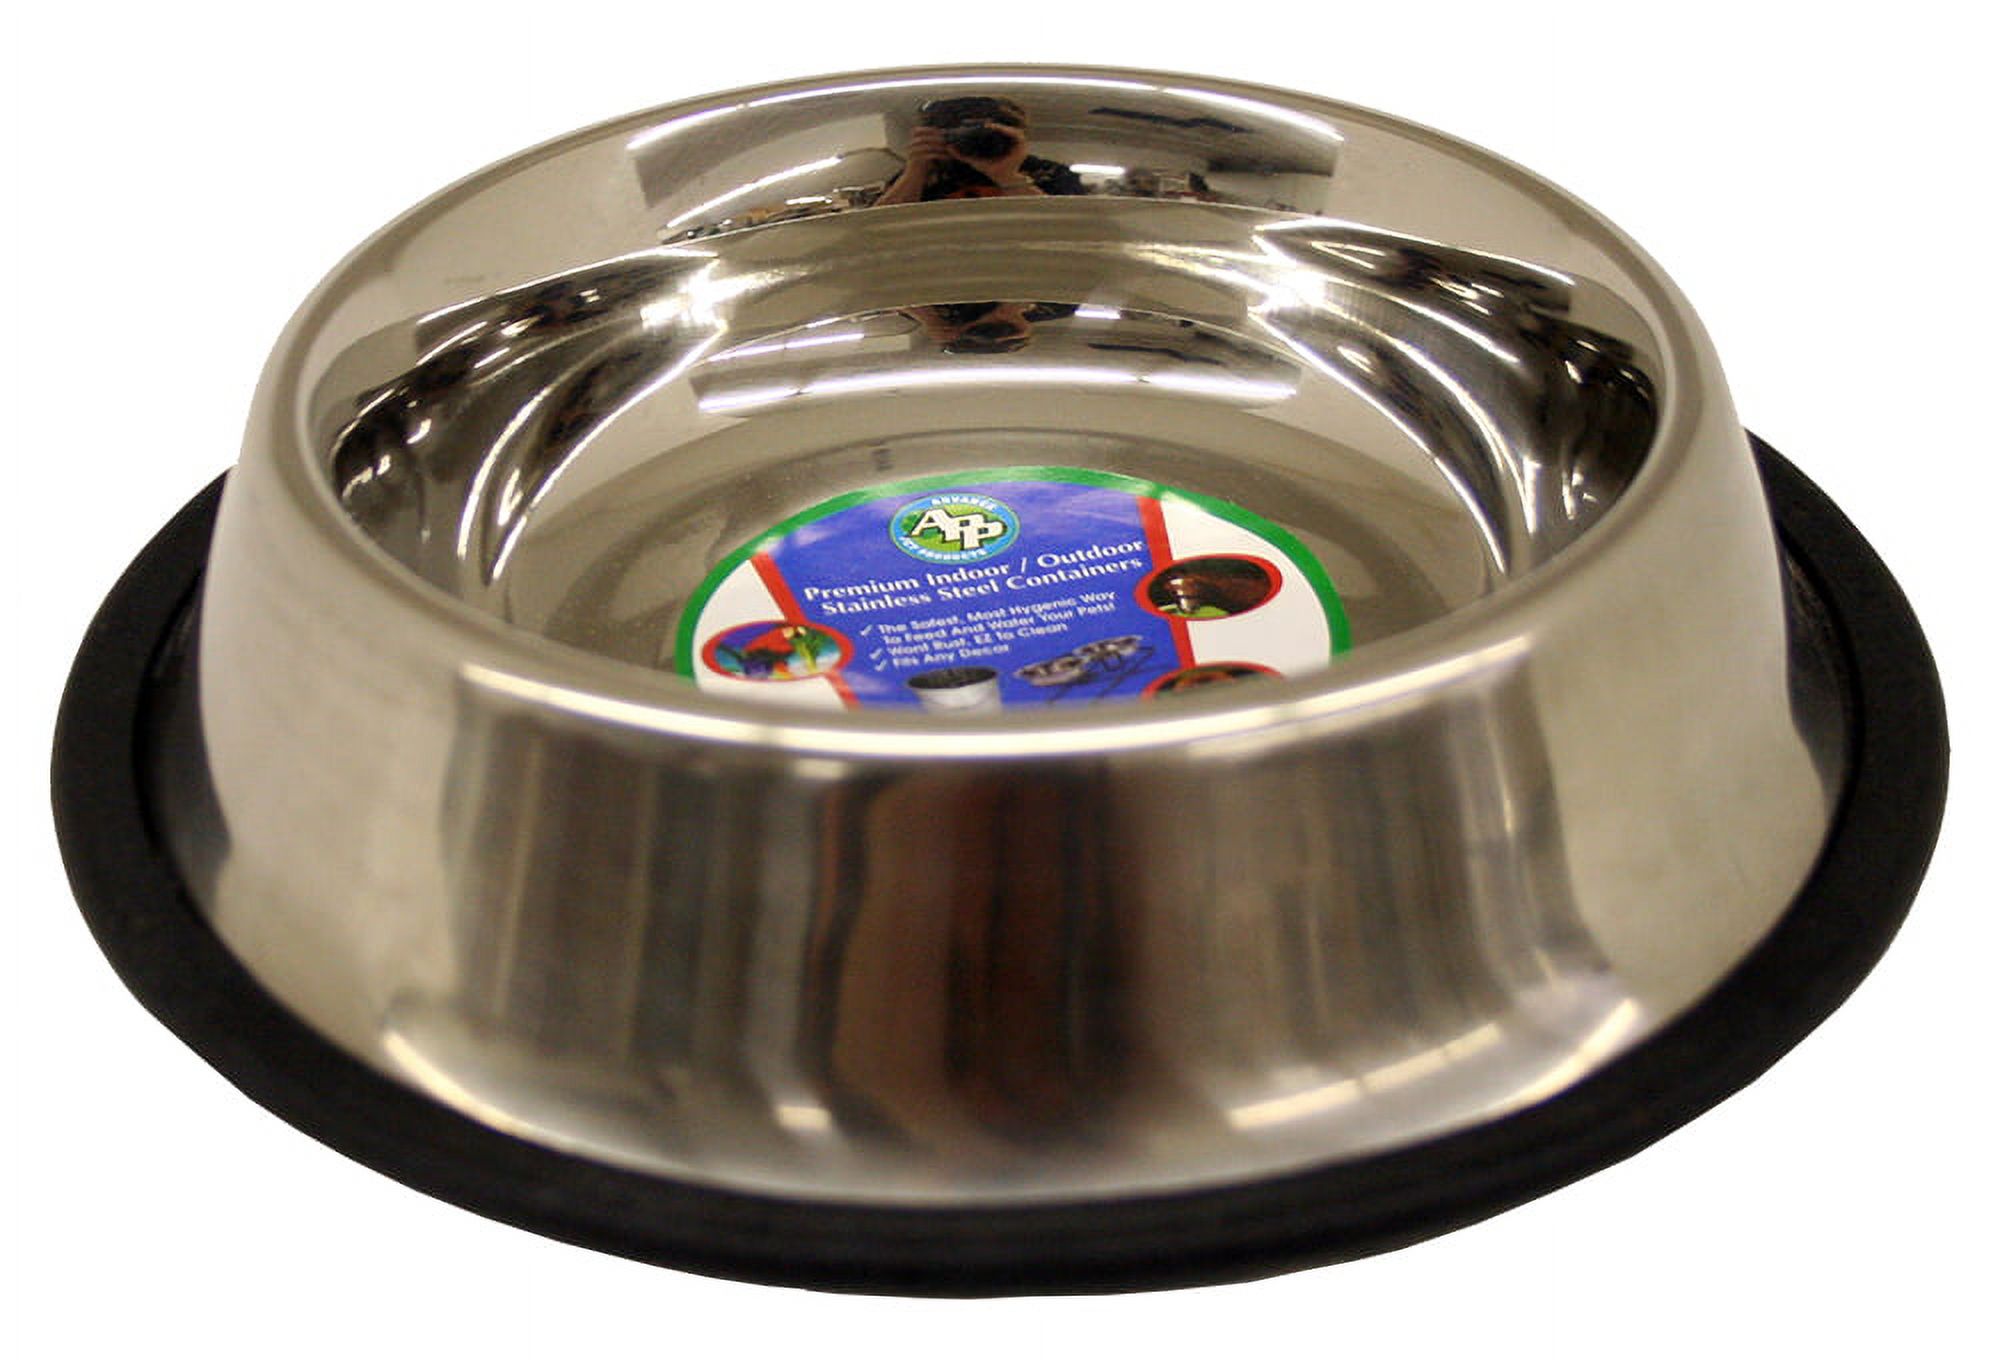 Indipets Stainless Steel No-Tip Dog Bowl 16 OZ - image 2 of 2